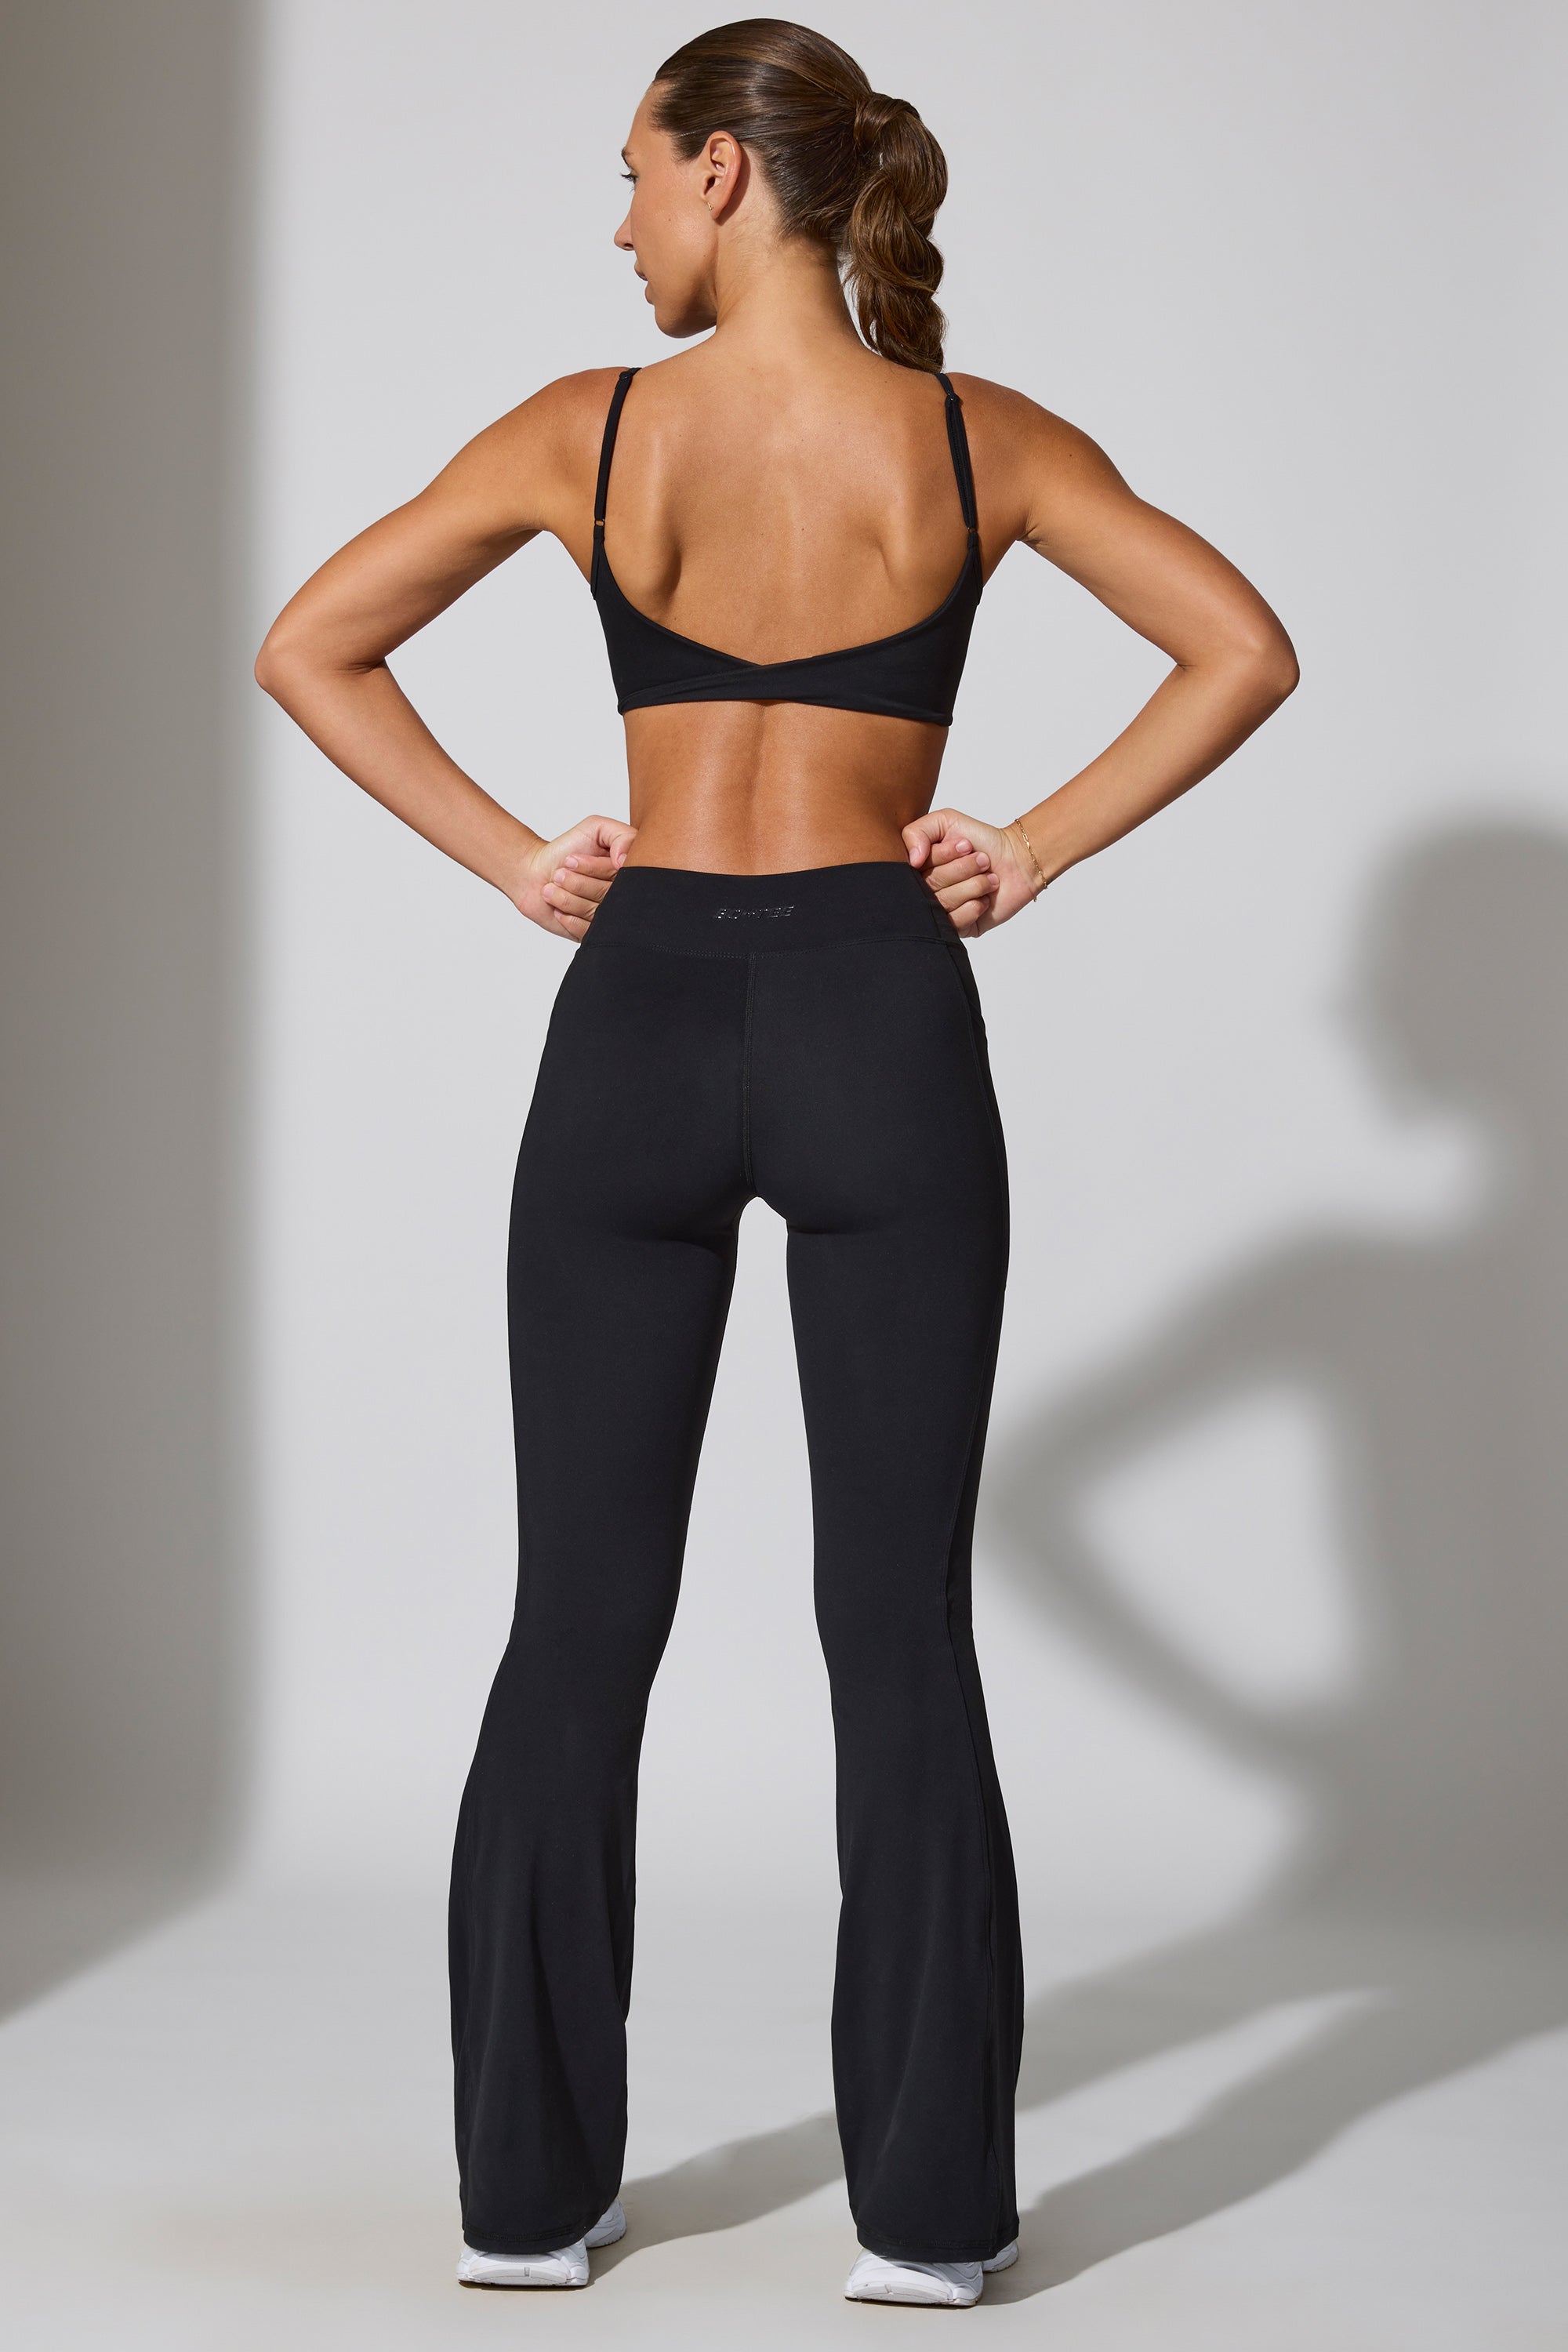 YOURS LONDON Plus Size Black Bow Hem Tapered Trousers